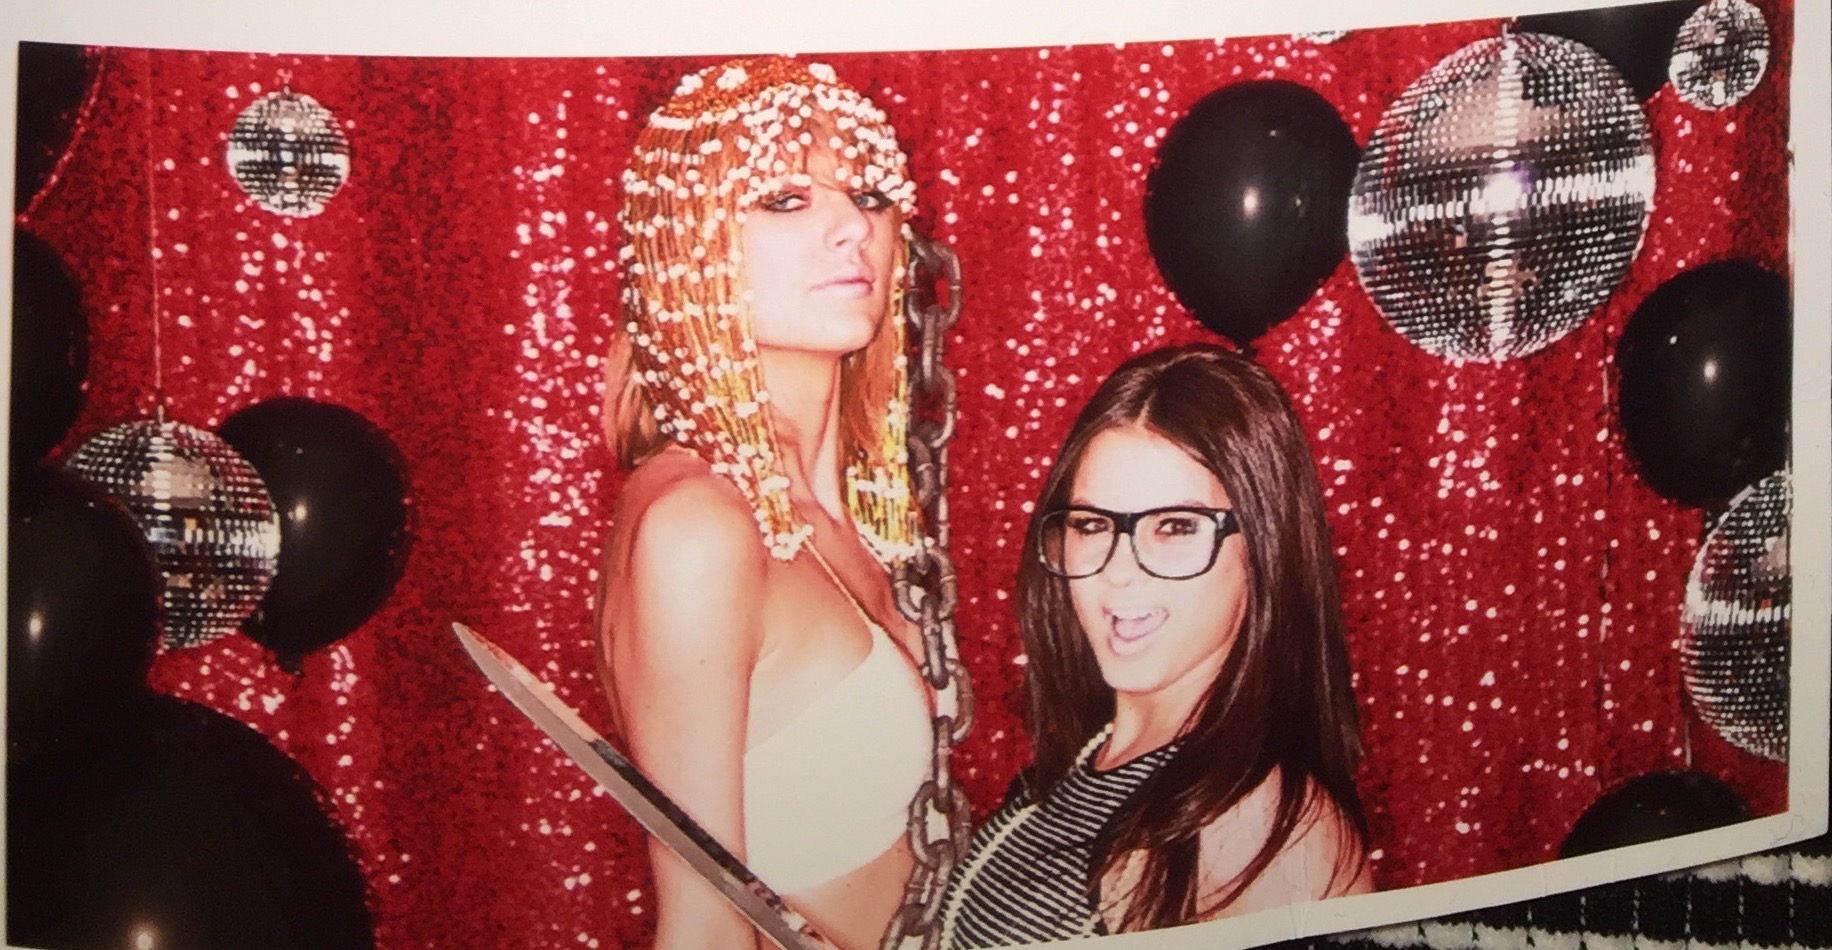 Jessica & Taylor Swift in the photobooth At Taylor Swift/Ed Sheeran Private Billboard Music Award Event 2015